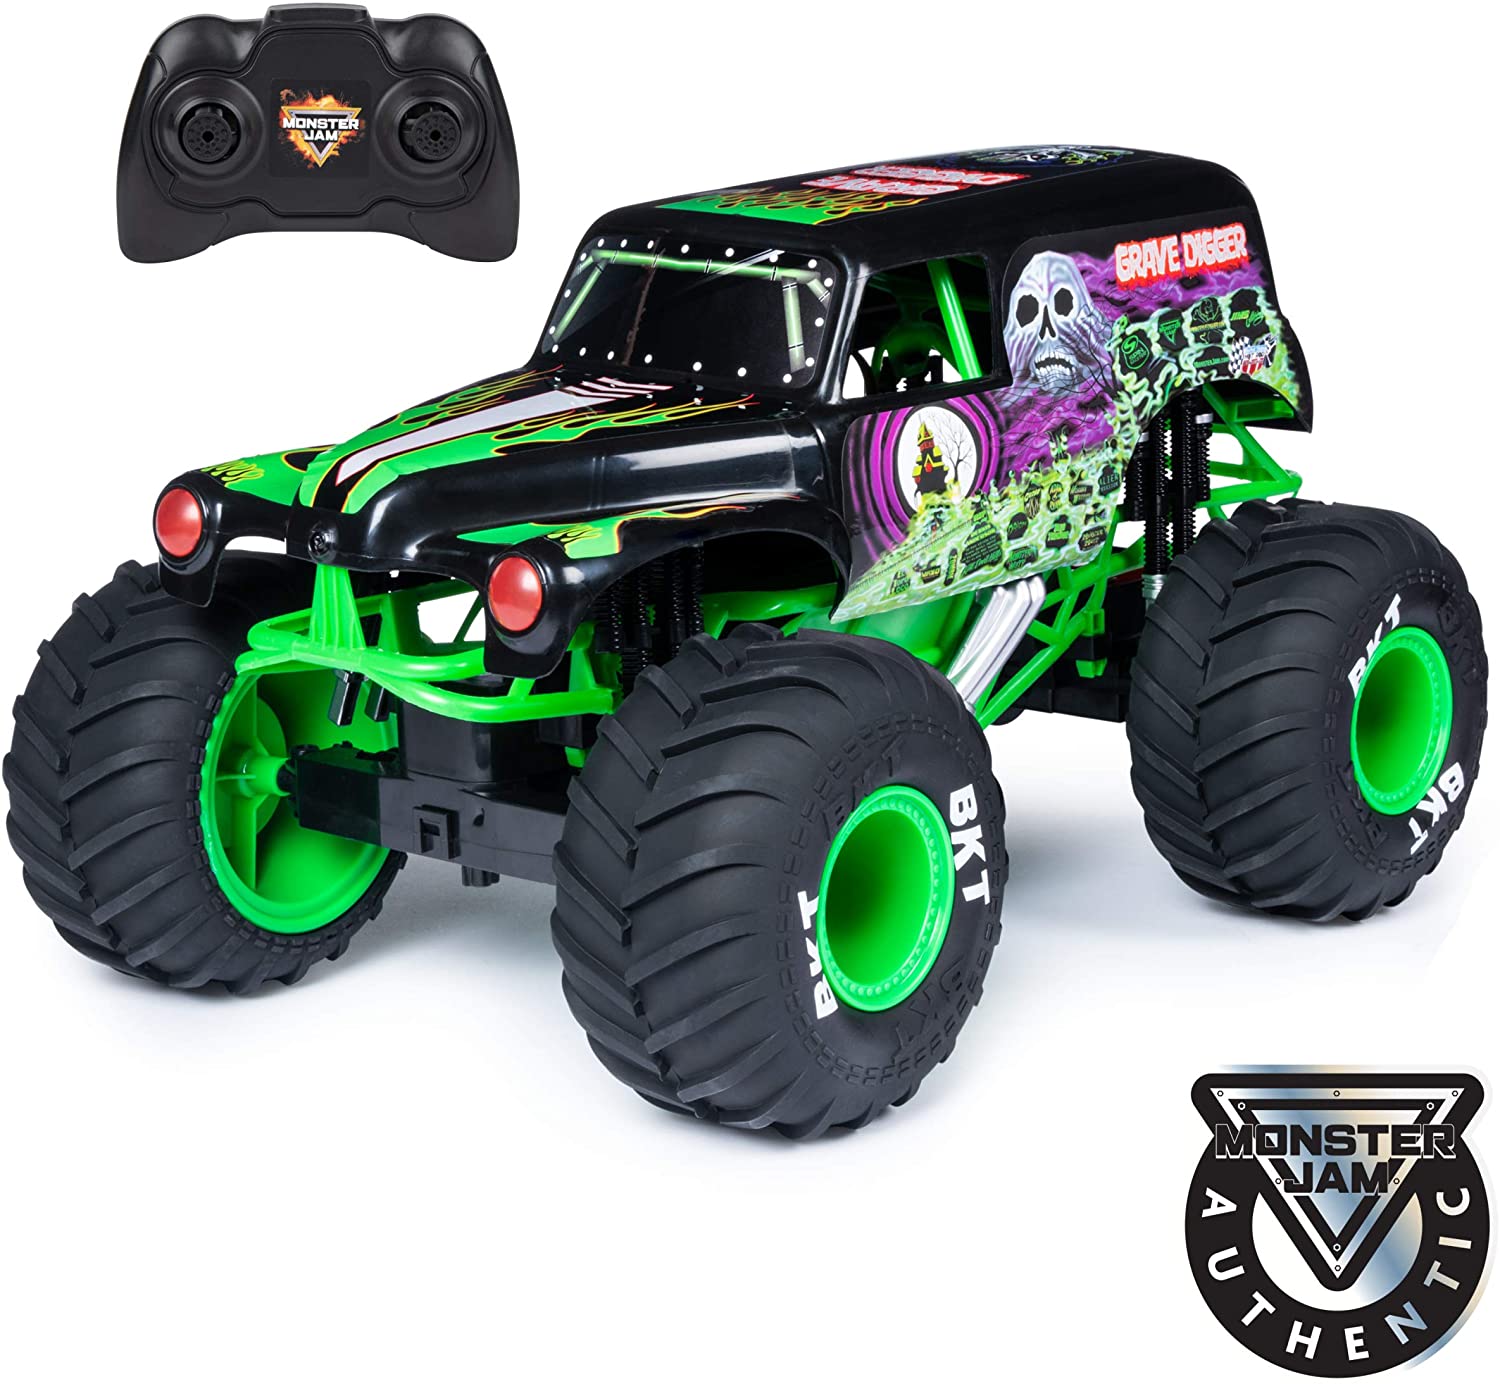 Monster Jam - Grave Digger RC Scale 1:10 (6044994)